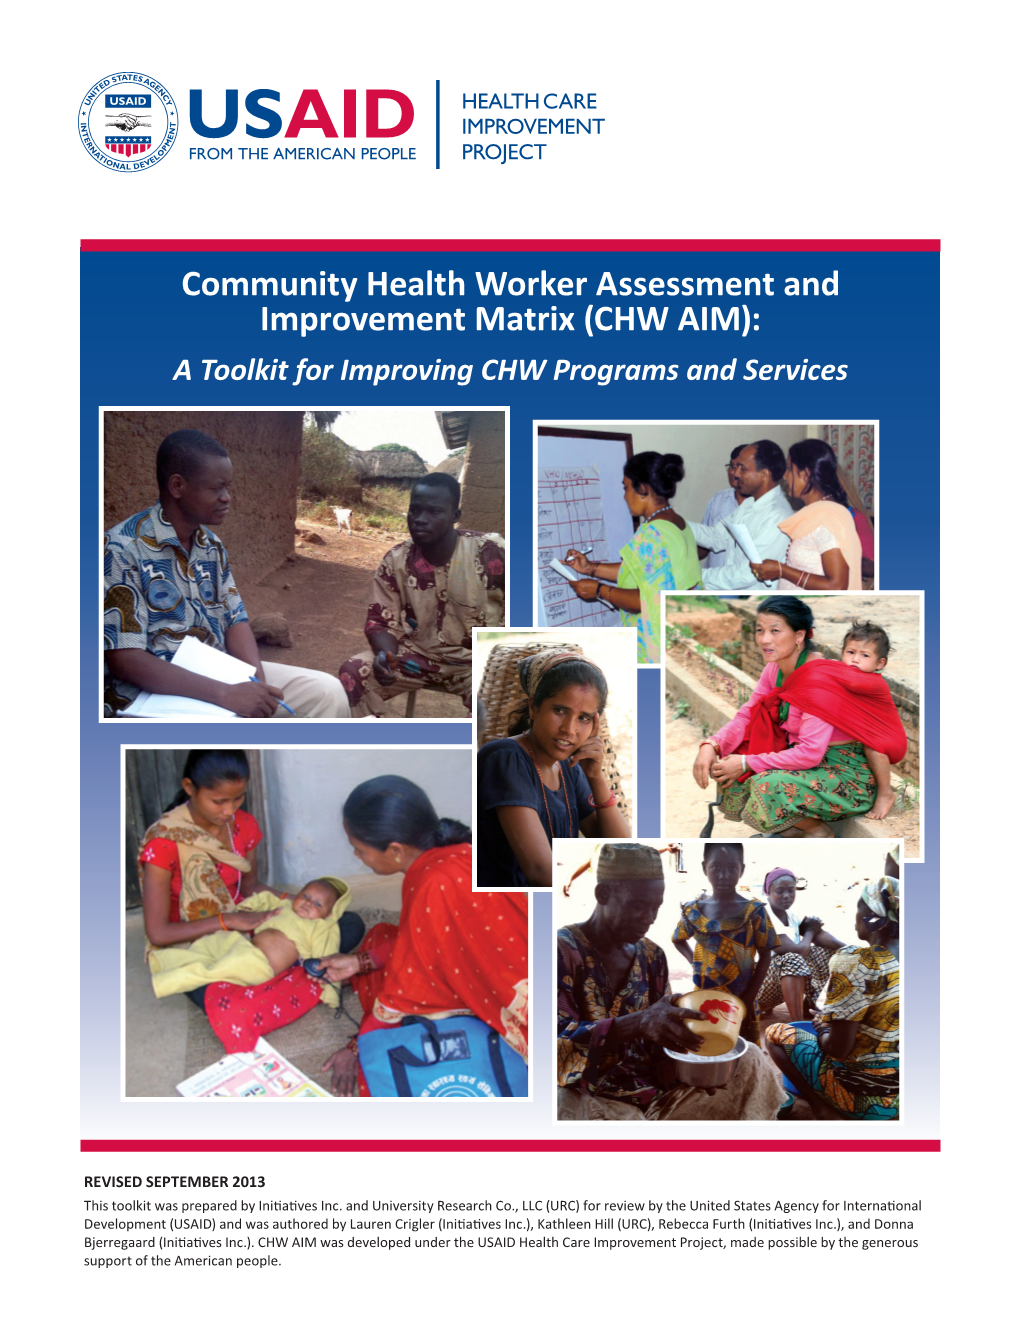 Community Health Worker Assessment and Improvement Matrix (CHW AIM): a Toolkit for Improving CHW Programs and Services